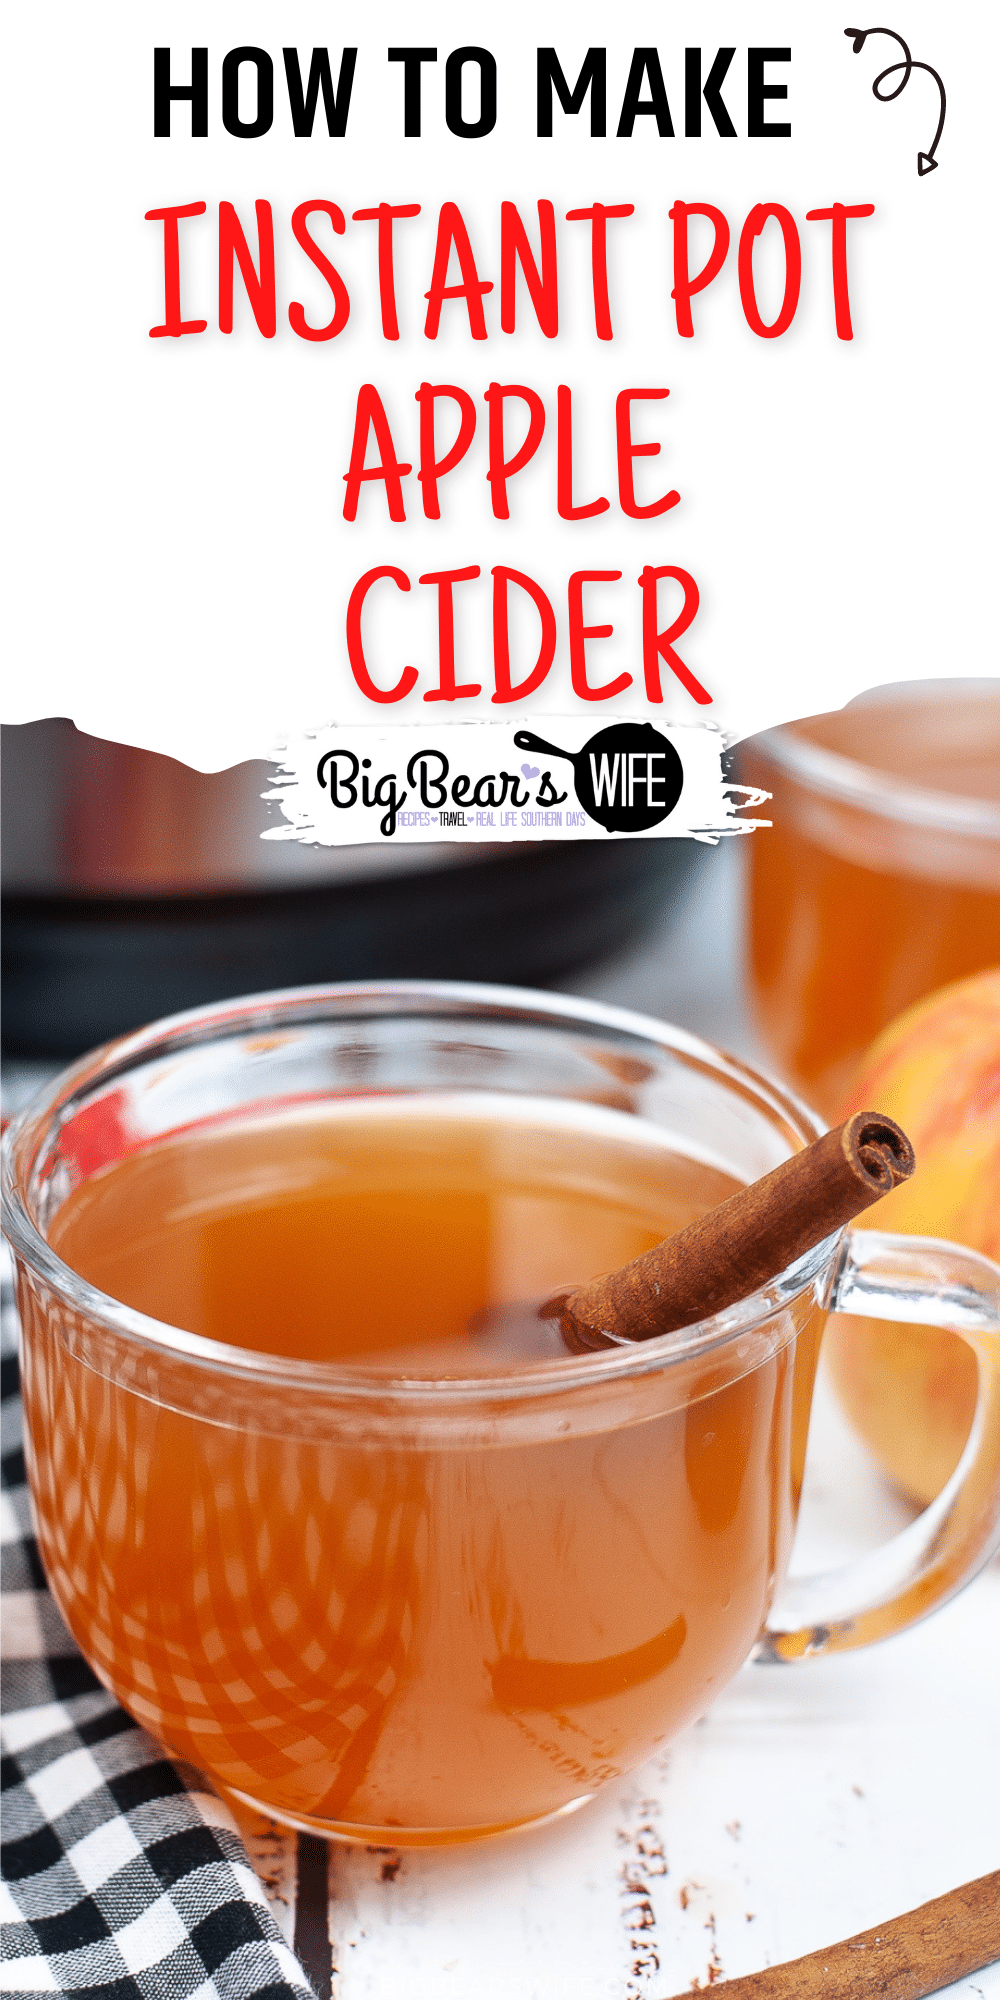 Warm up this fall and winter with a warm mug of homemade Instant Pot Apple Cider! A perfect mug of apple and cinnamon is waiting for you! via @bigbearswife